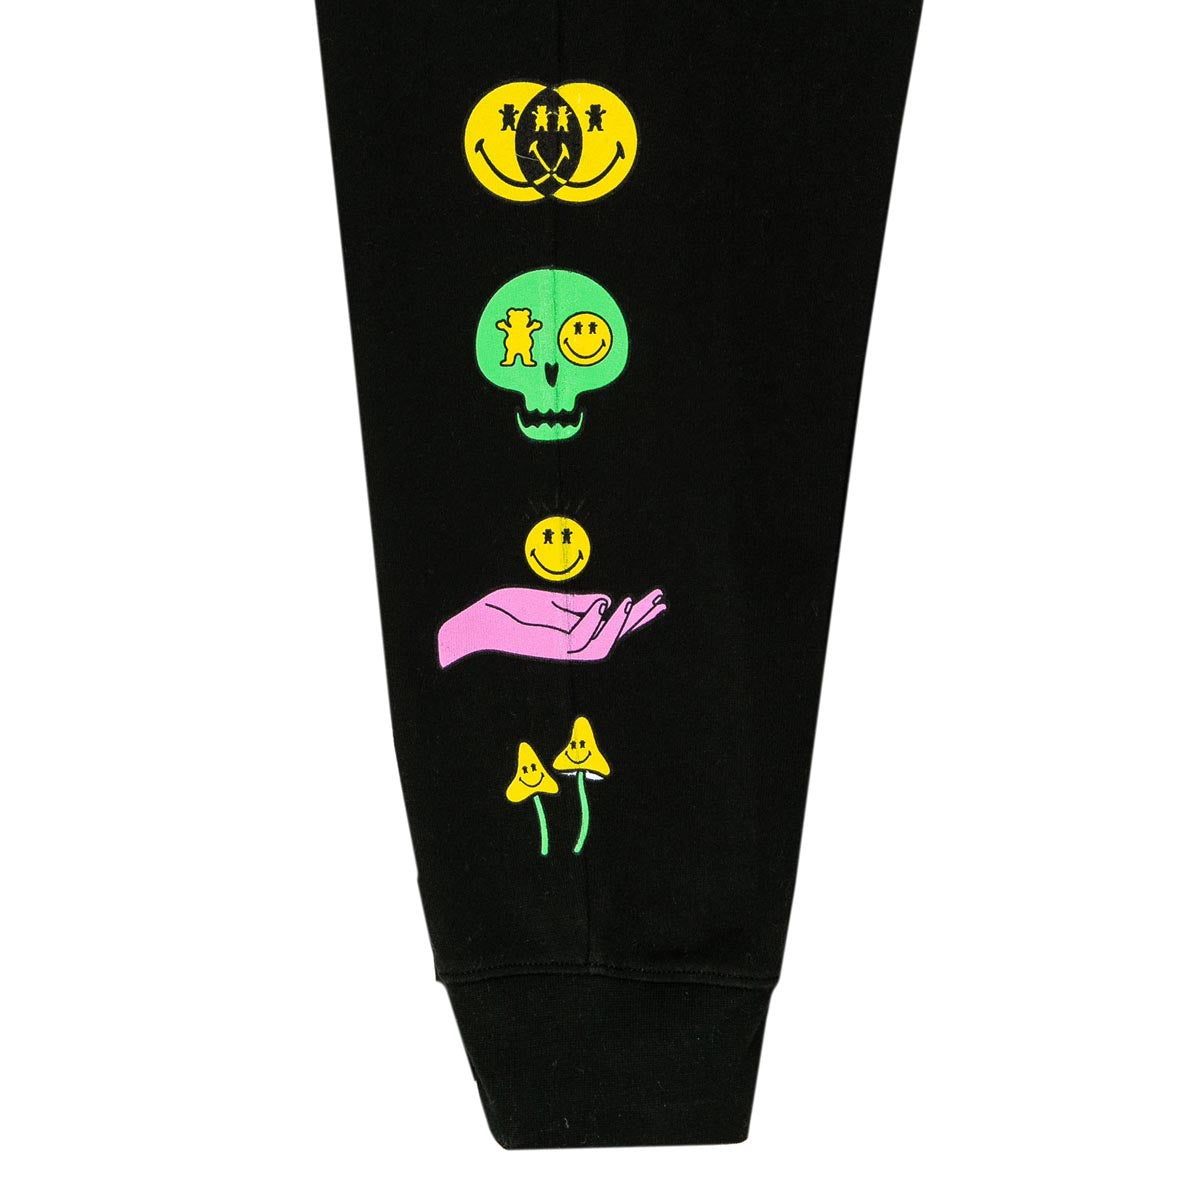 Grizzly x Smiley World Sweat Pants - Black image 4